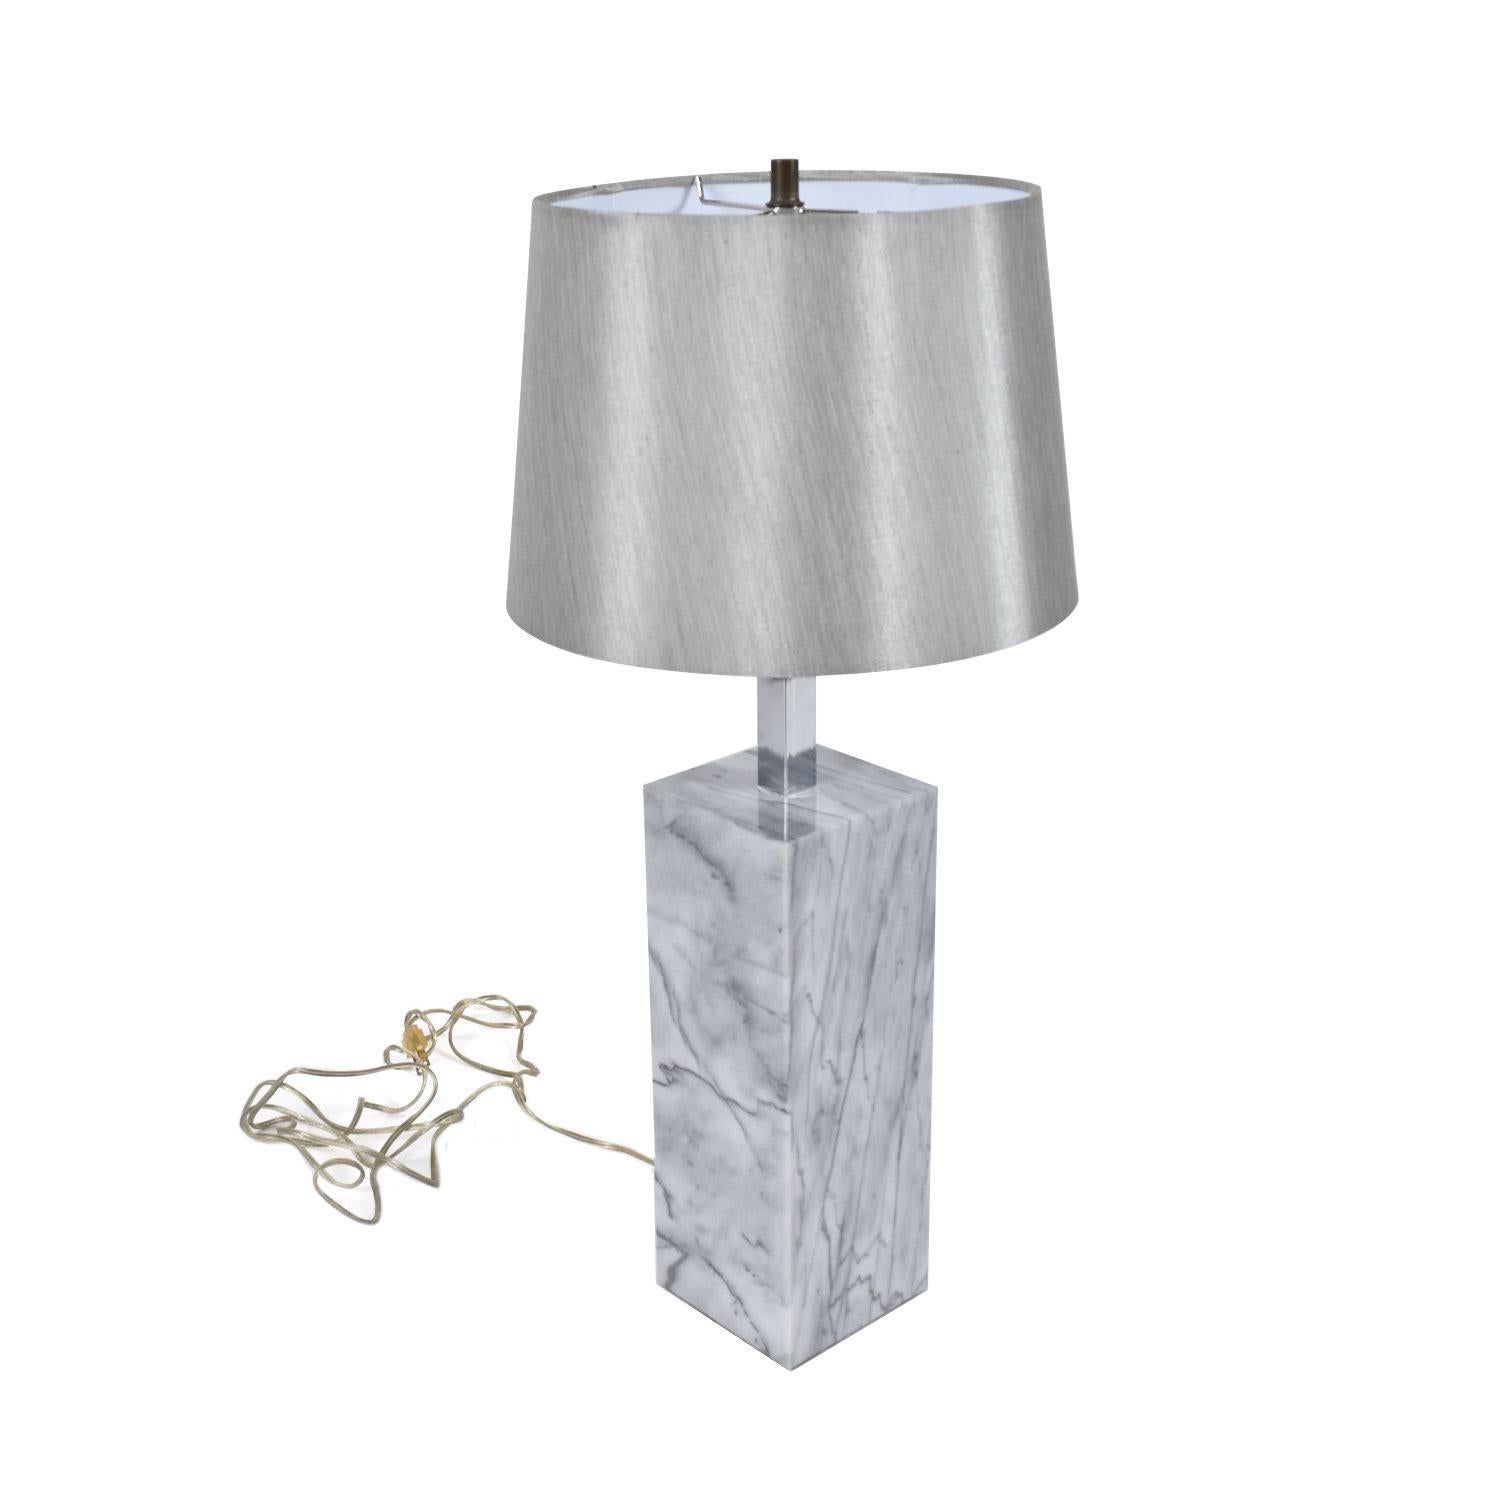 Mid-Century Modern Nessen Style Gray Marble Table Lamp with Chrome Neck and Silver Shade For Sale